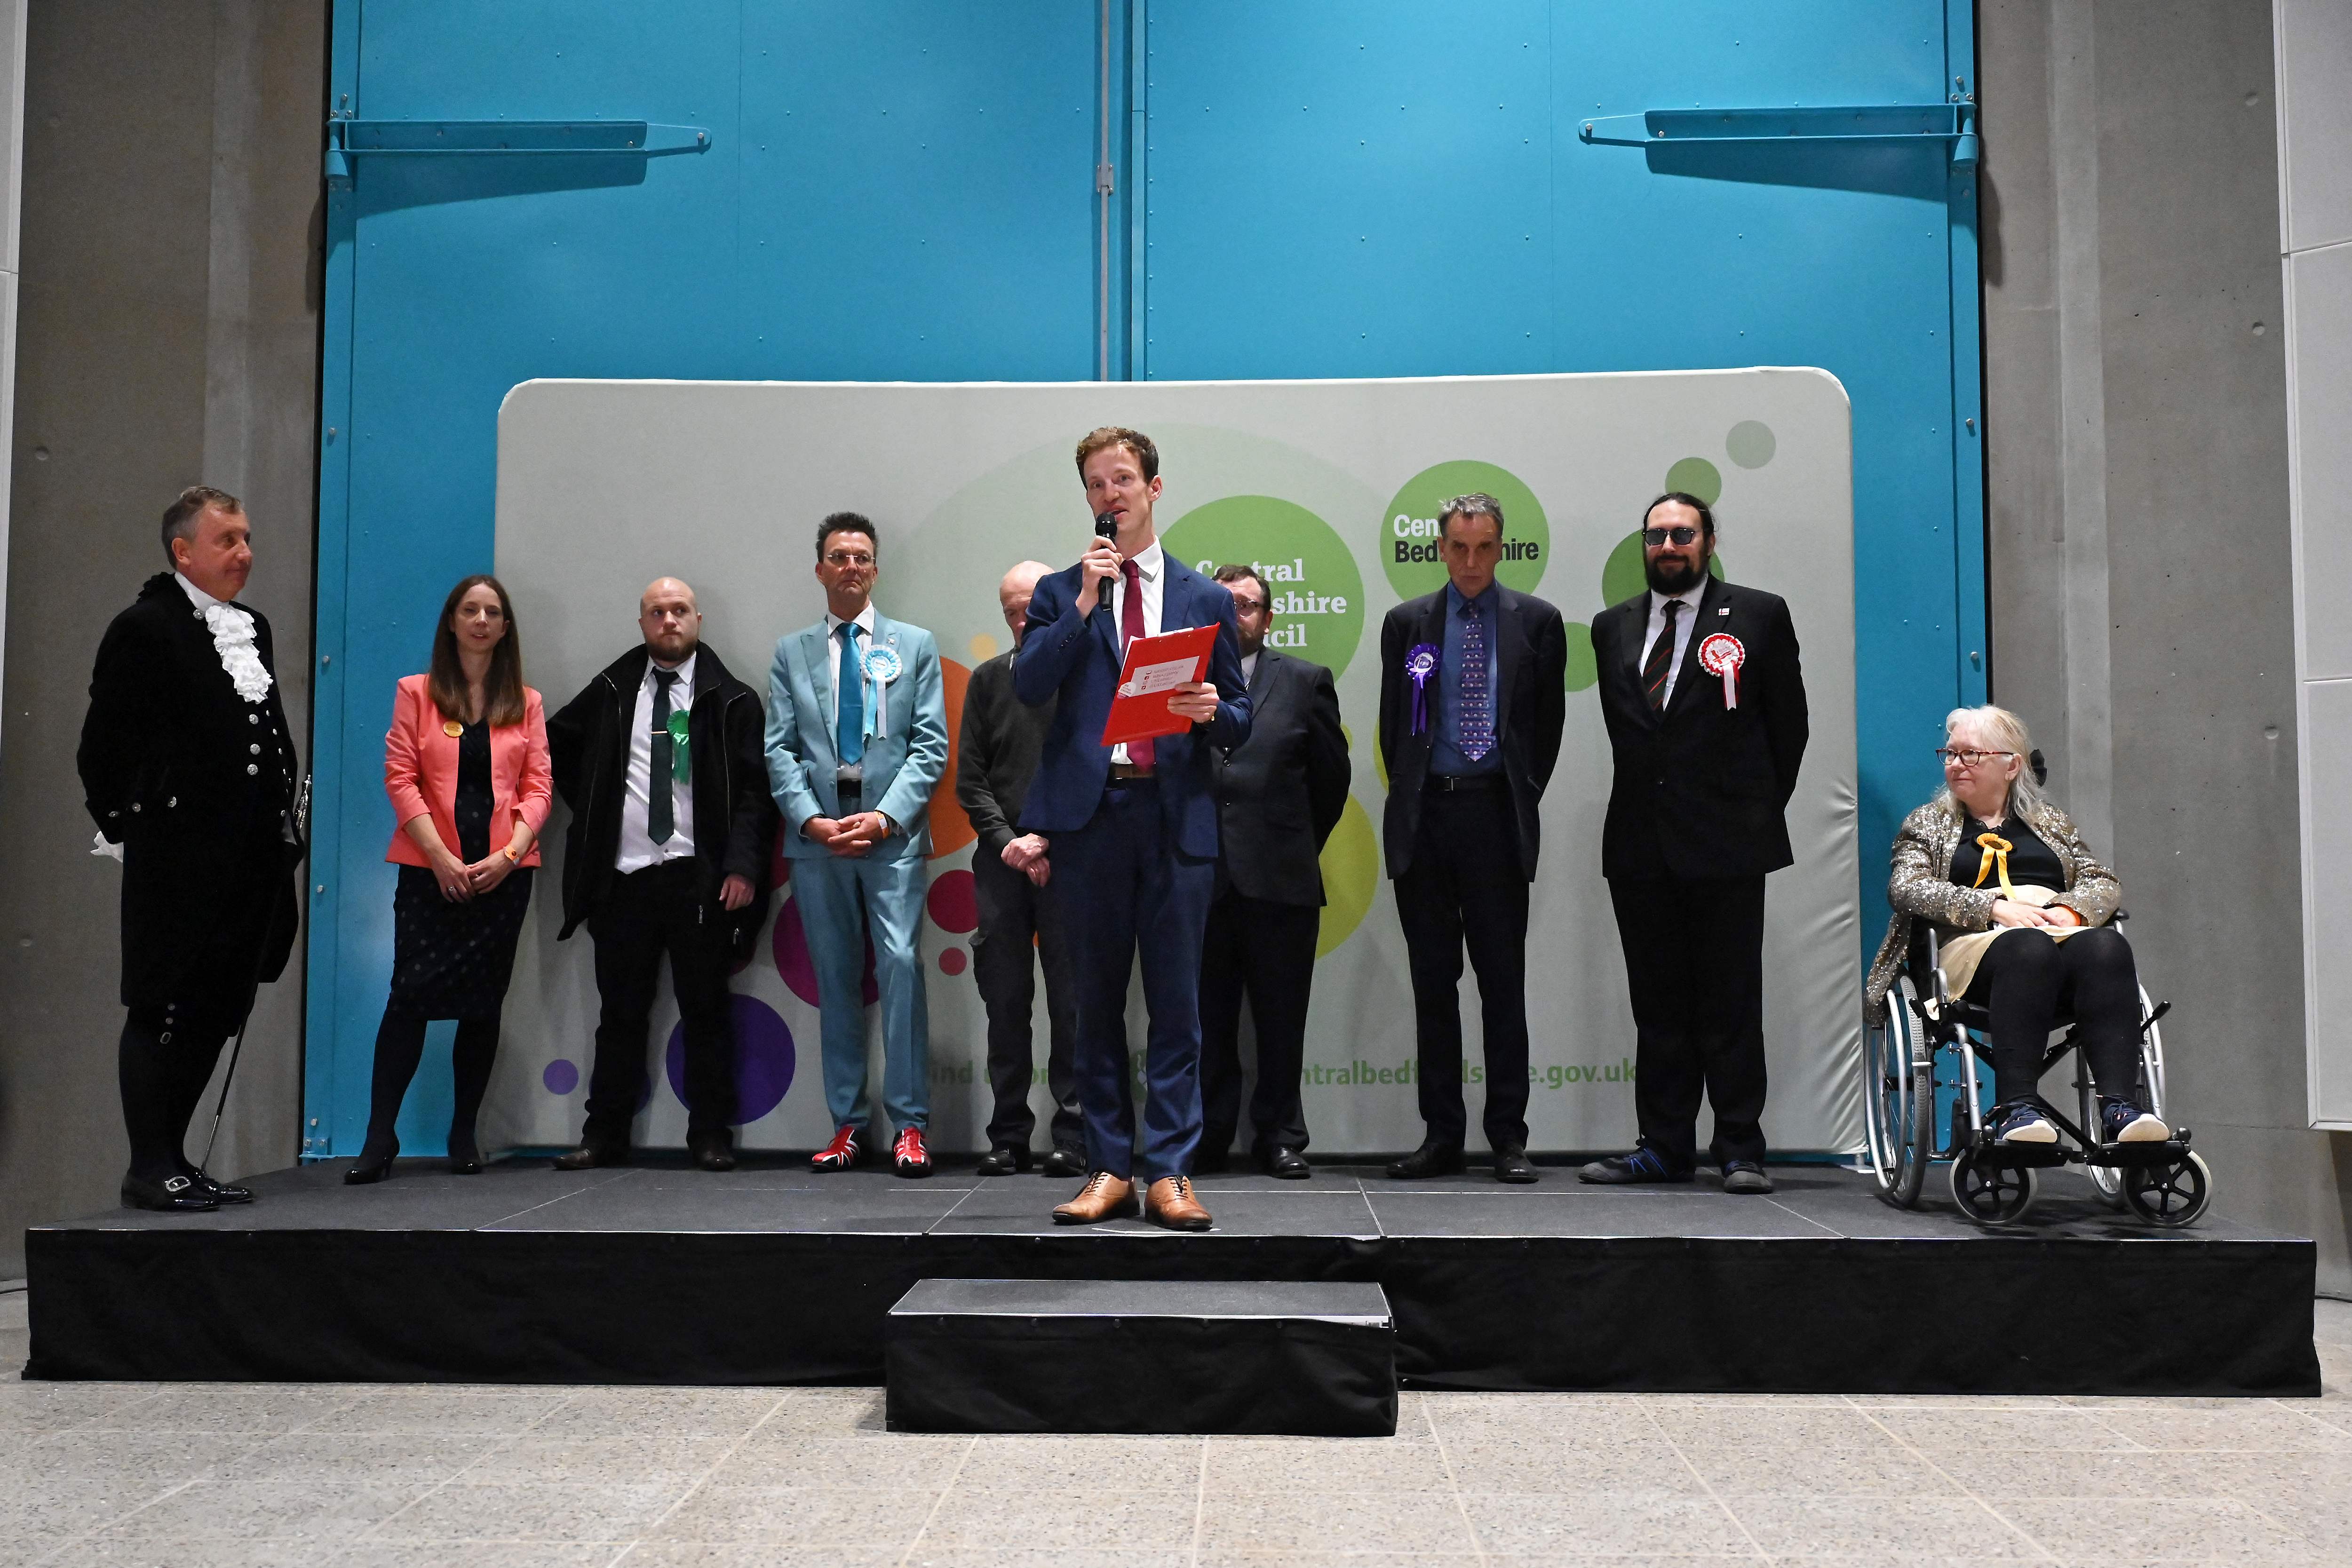 Labour Party candidate Alistair Strathern gives a speech after winning the Mid Bedfordshire Parliamentary by-election, at the count centre in Shefford, north of London on 20 October 2023